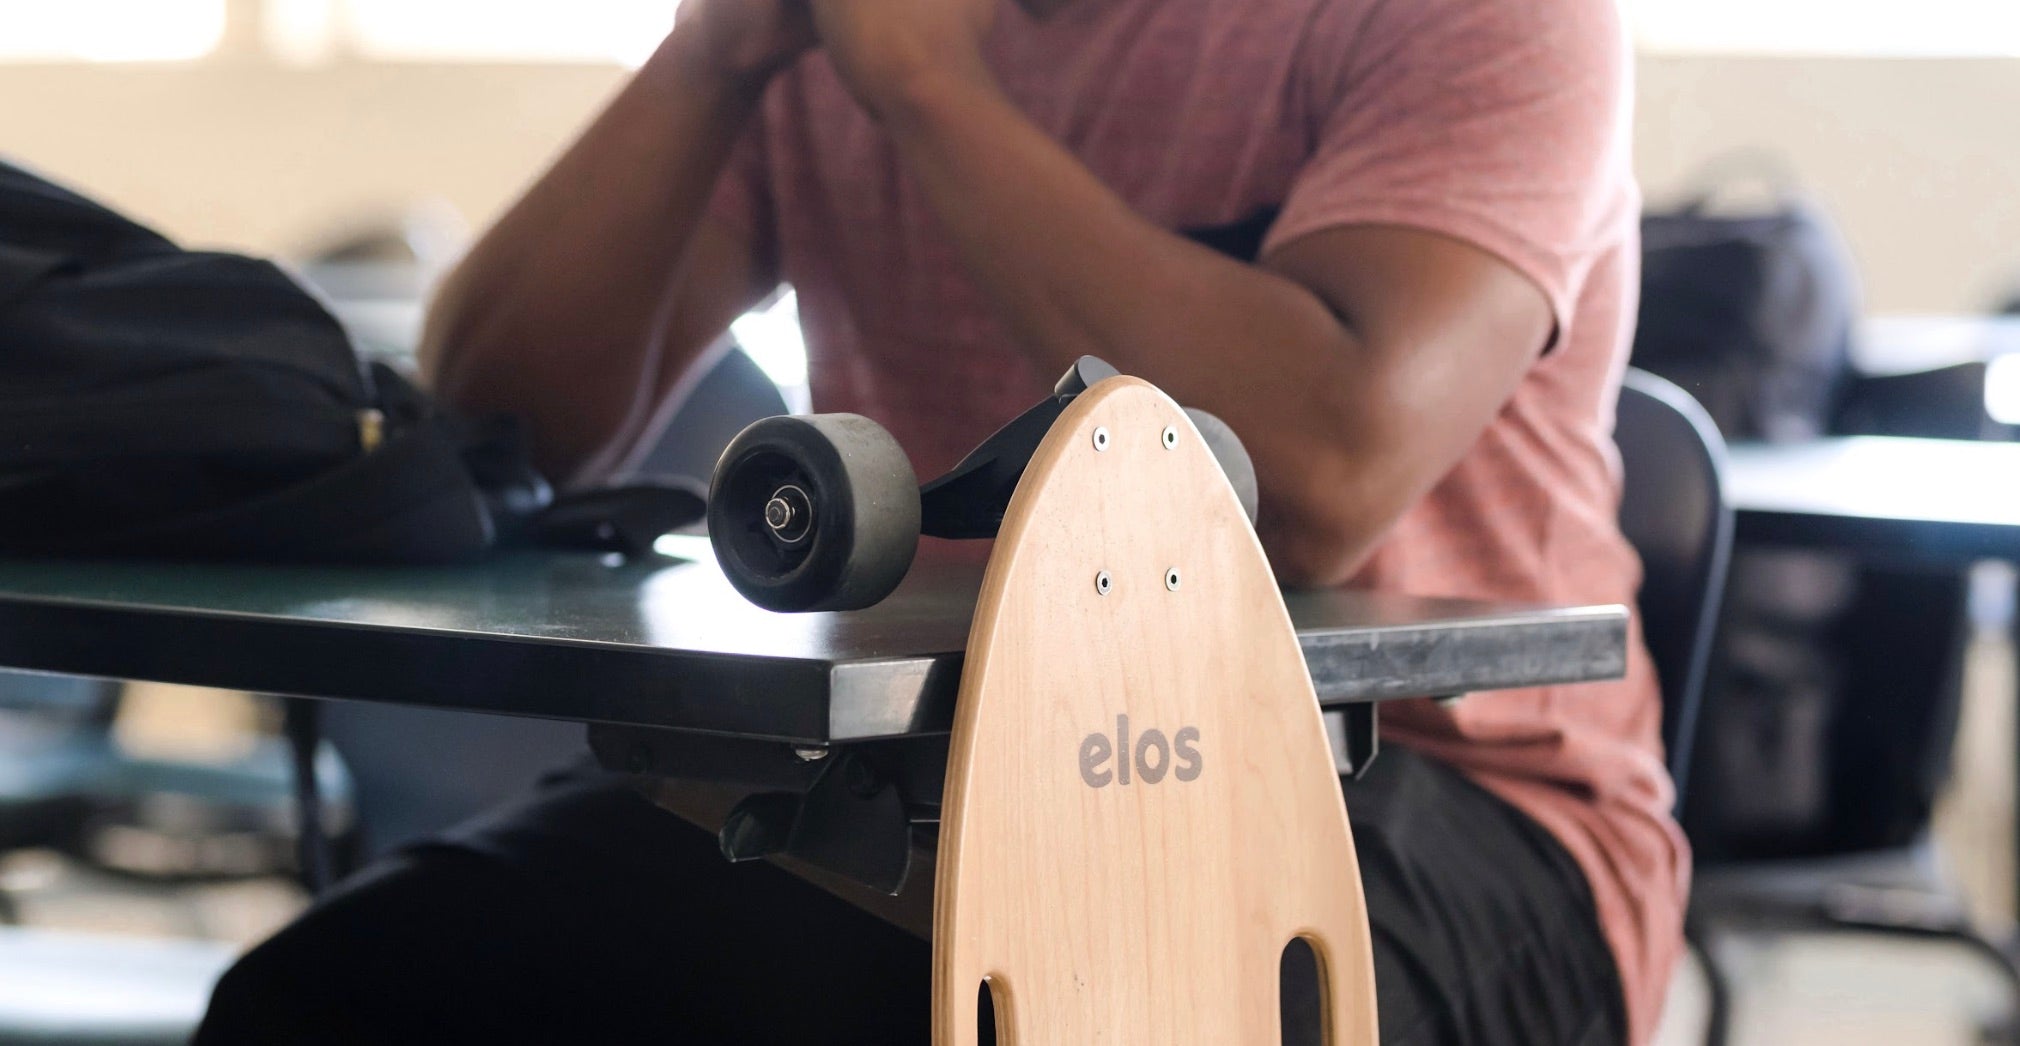 Elos® Official Store | Cruiser Skateboards and Outdoor Accessories 